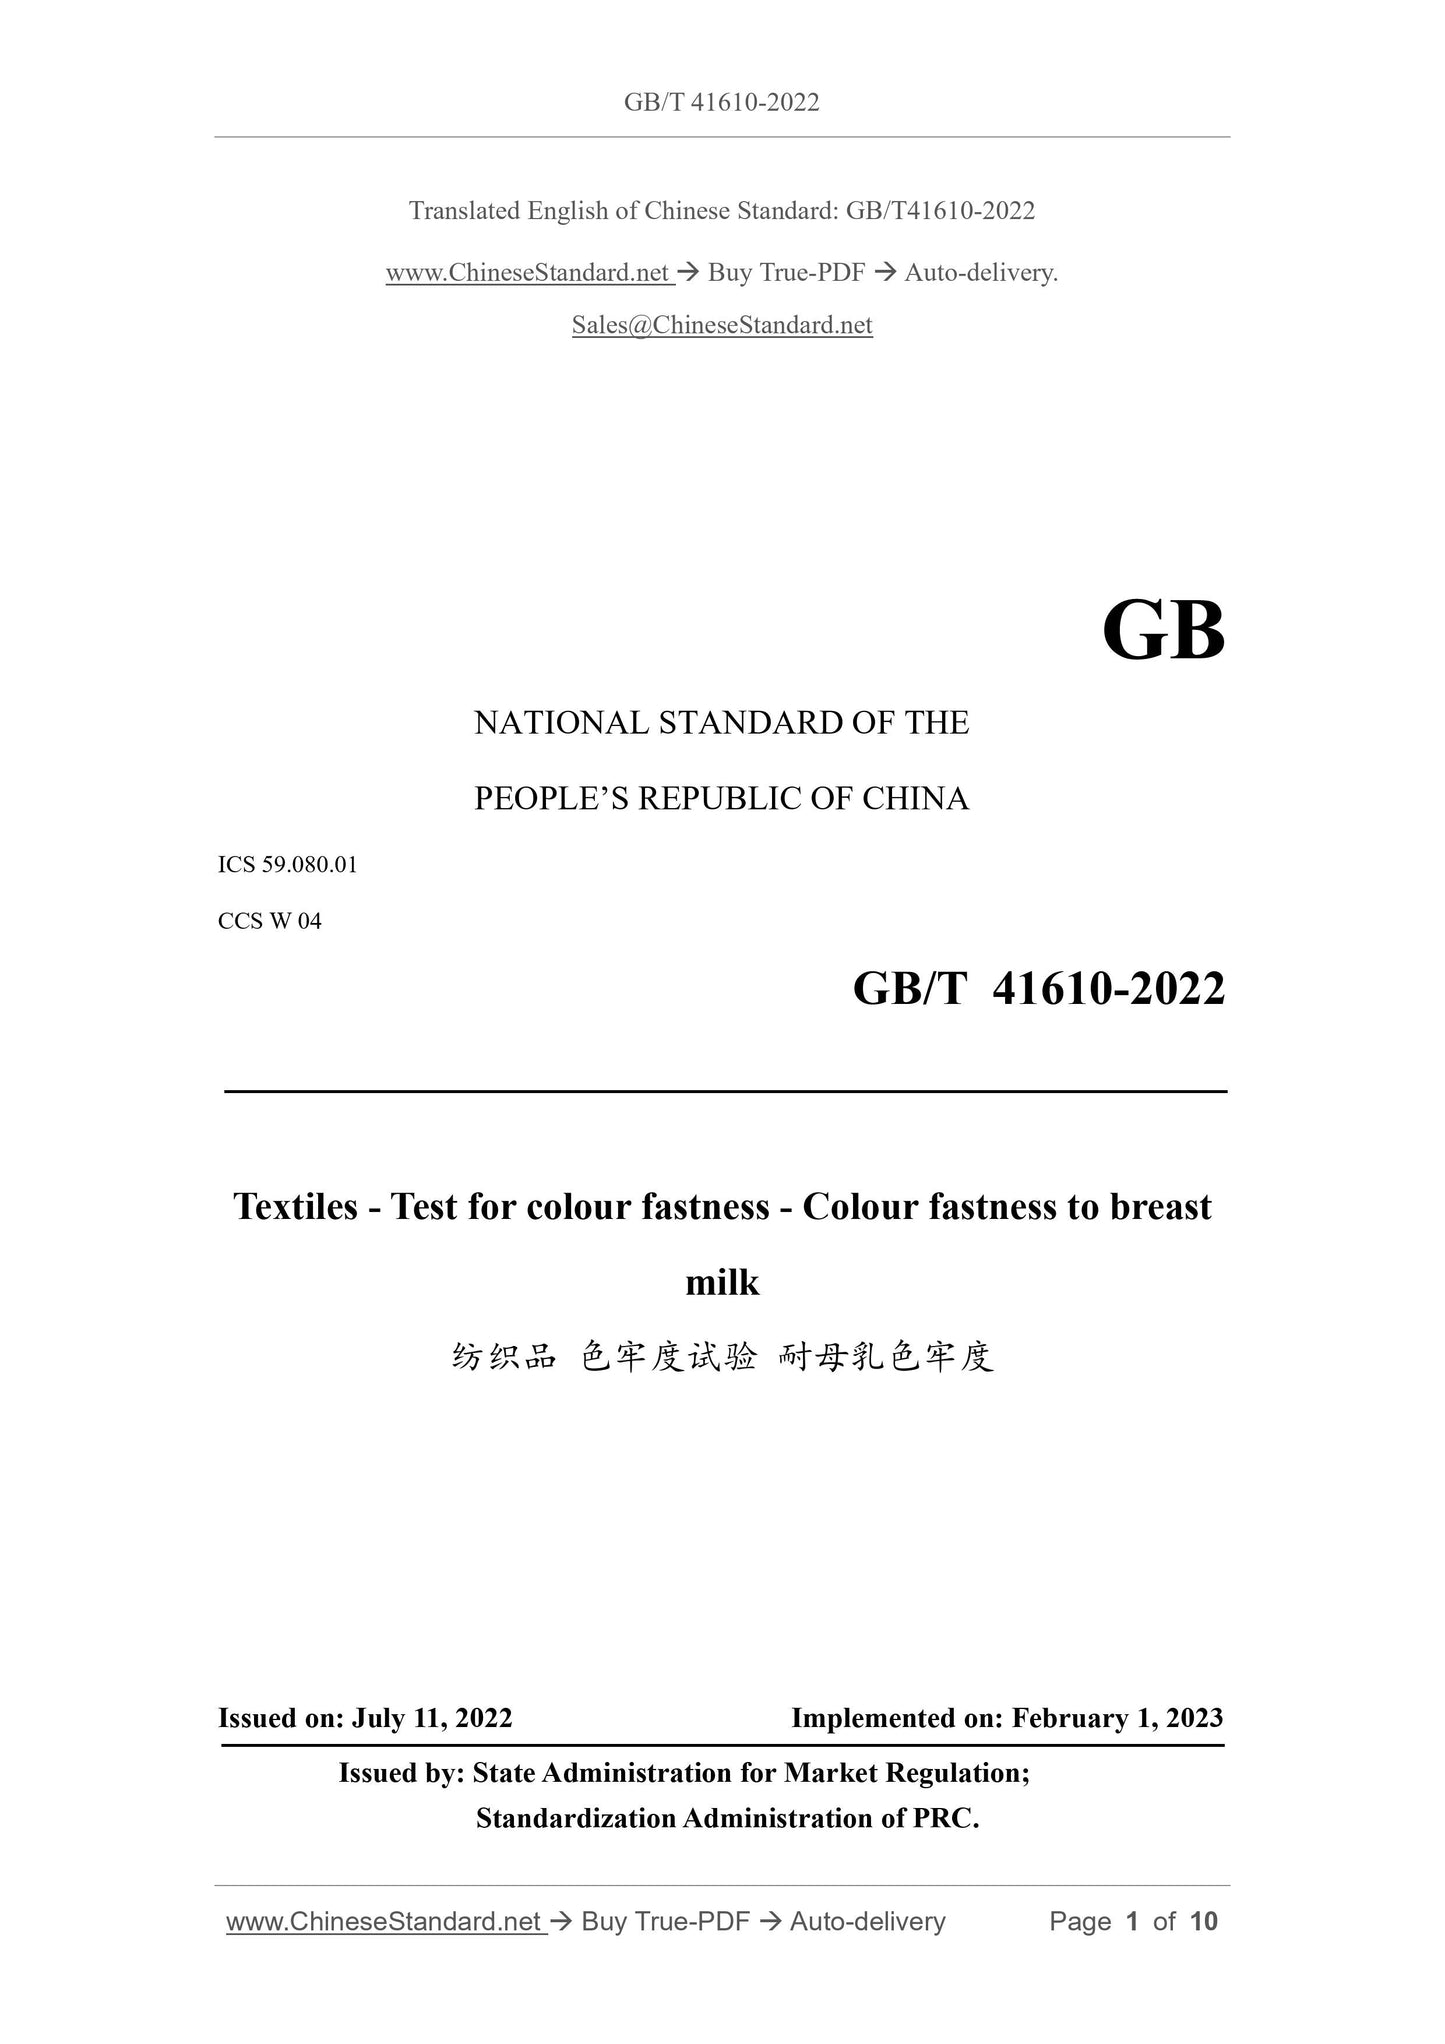 GB/T 41610-2022 Page 1